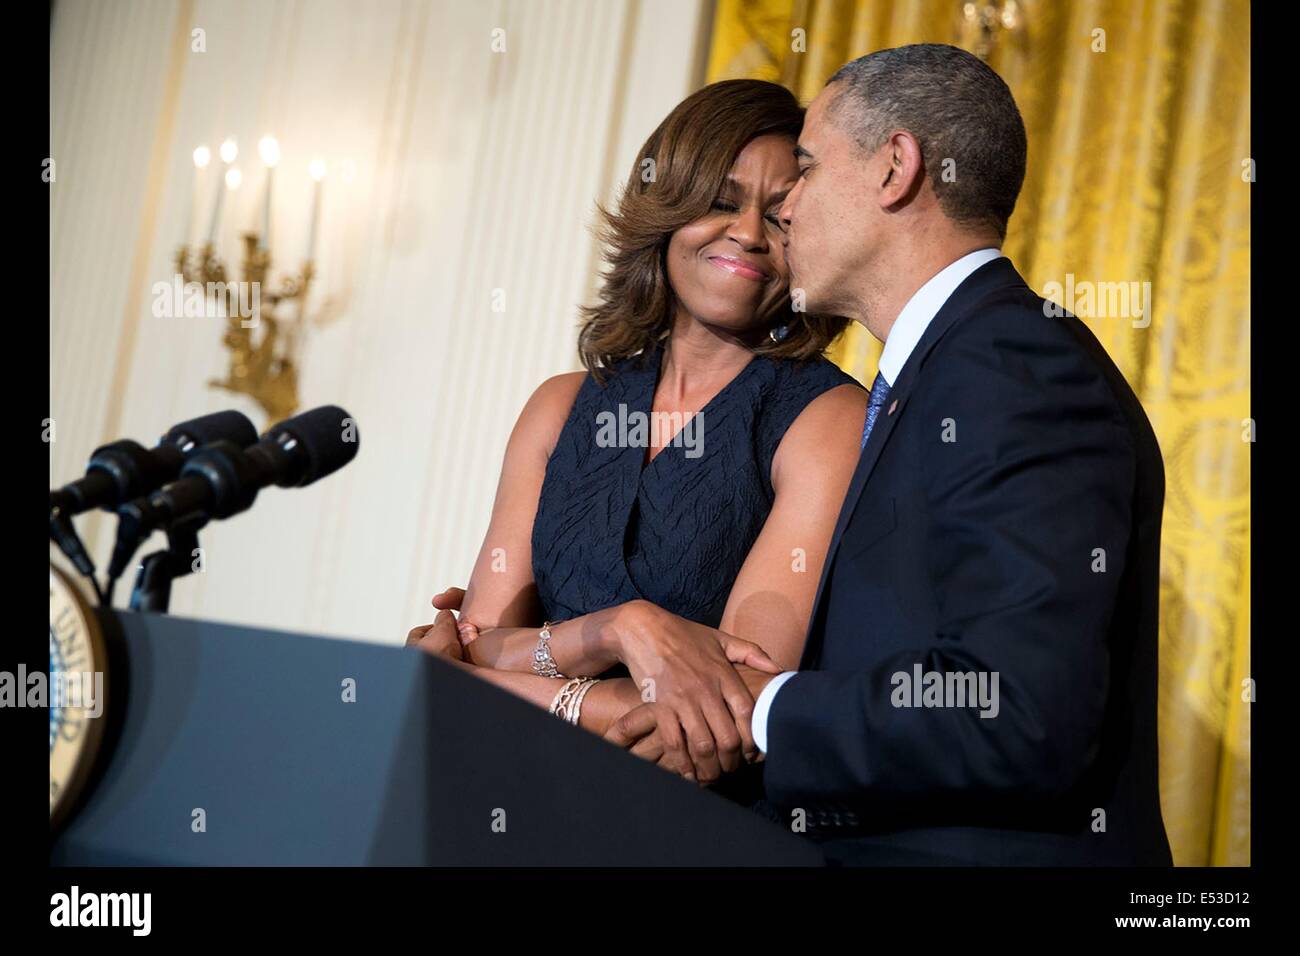 US President Barack Obama kisses First Lady Michelle Obama following her remarks at an Affordable Care Act reception in the East Room of the White House May 1, 2014 in Washington, DC. Stock Photo